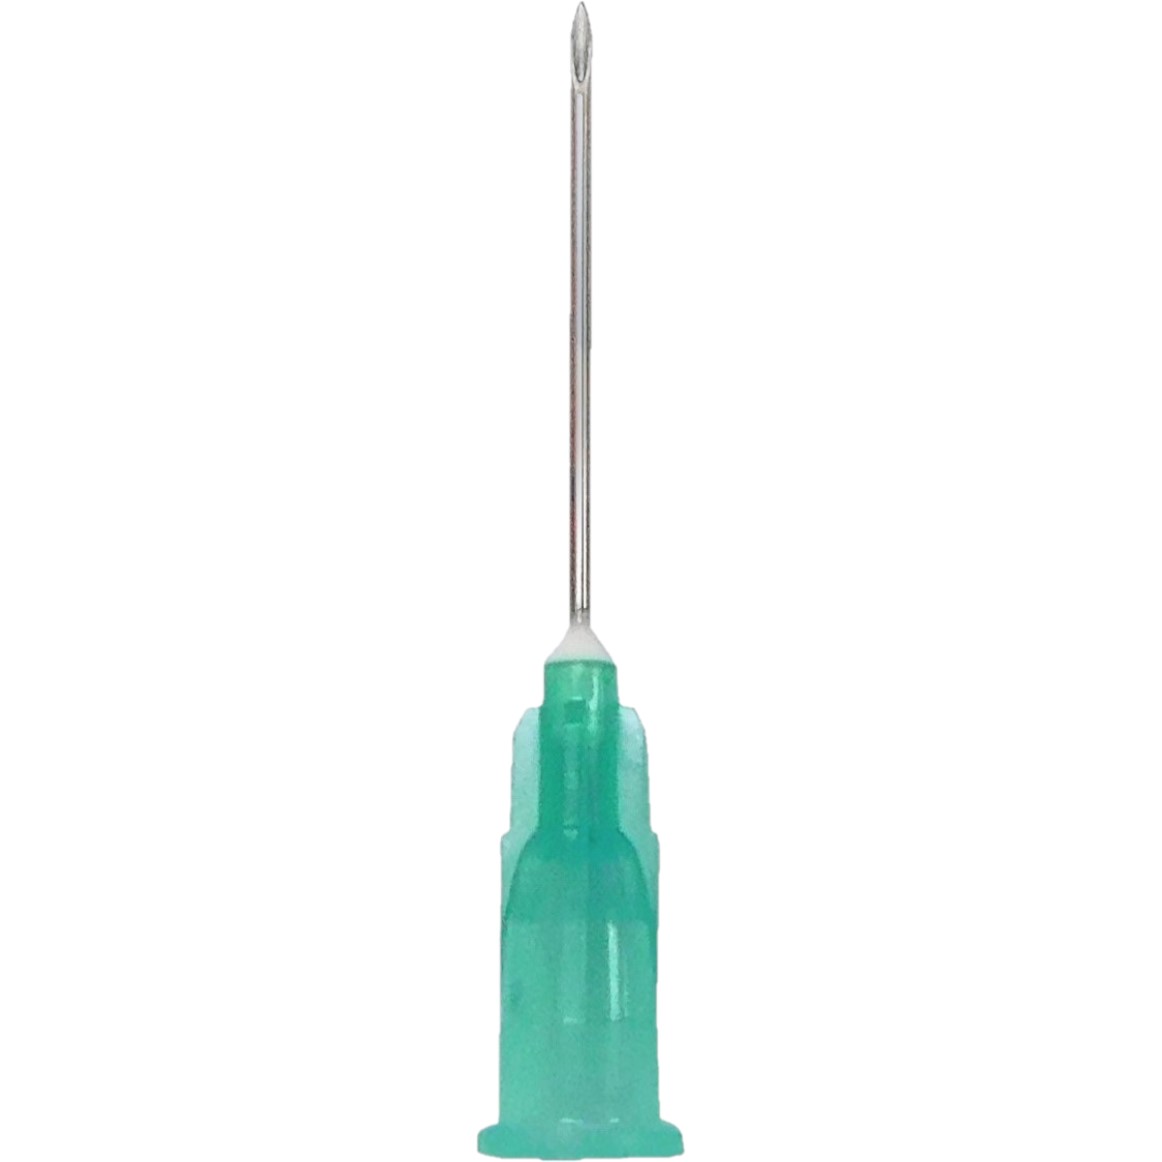 Needle Hypodermic Without Safety 21 Gauge 1 Inch .. .  .  